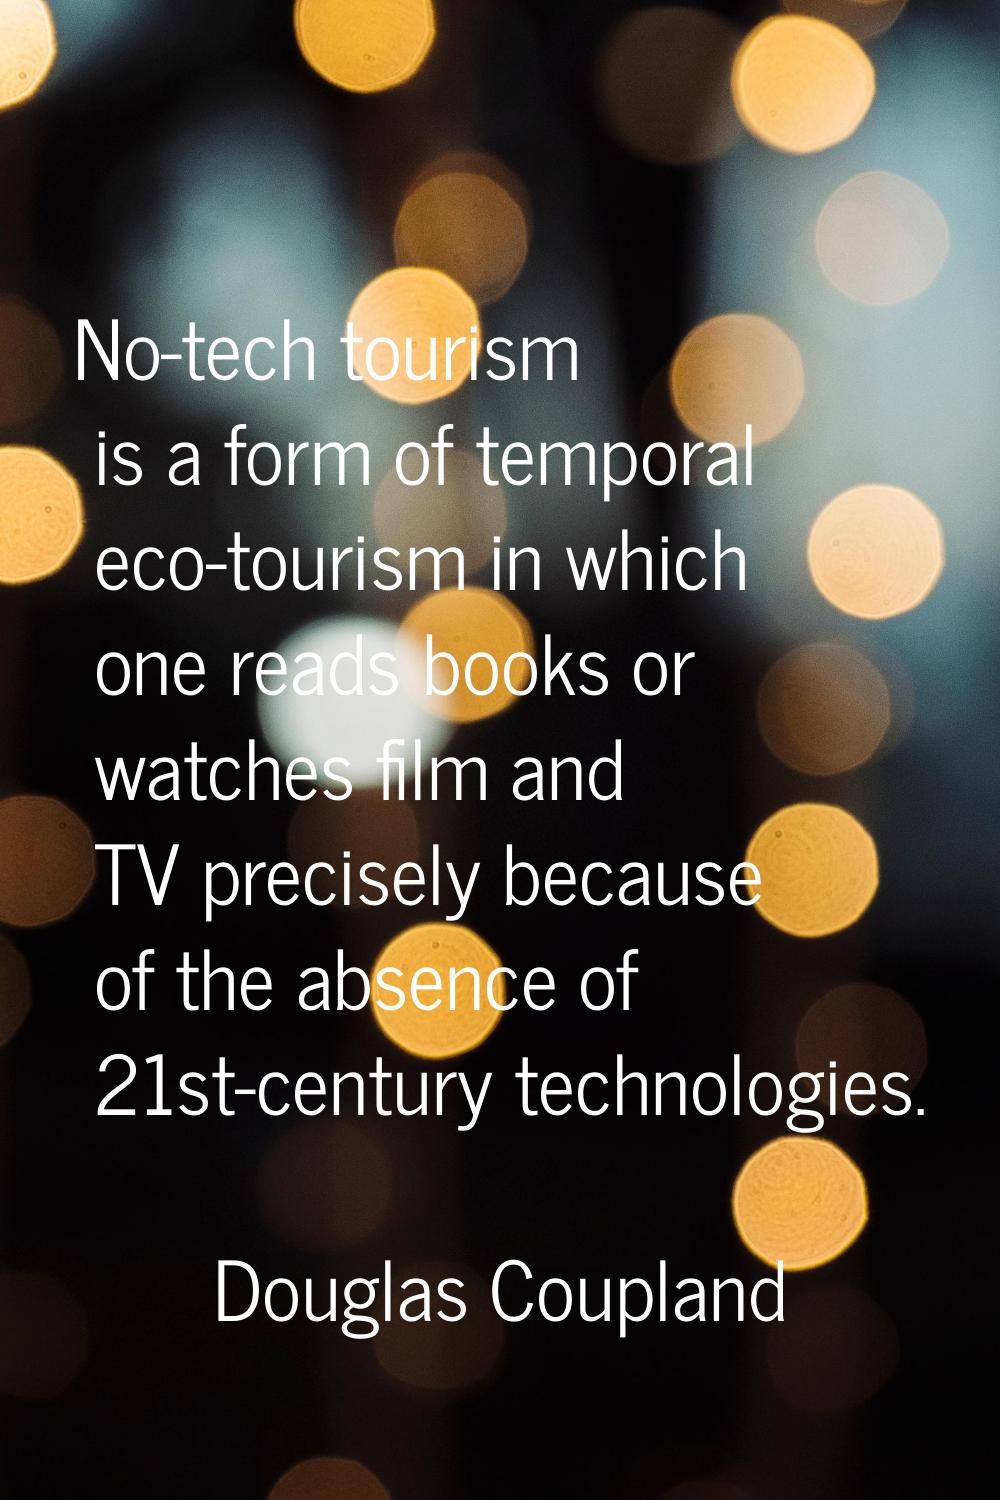 No-tech tourism is a form of temporal eco-tourism in which one reads books or watches film and TV p